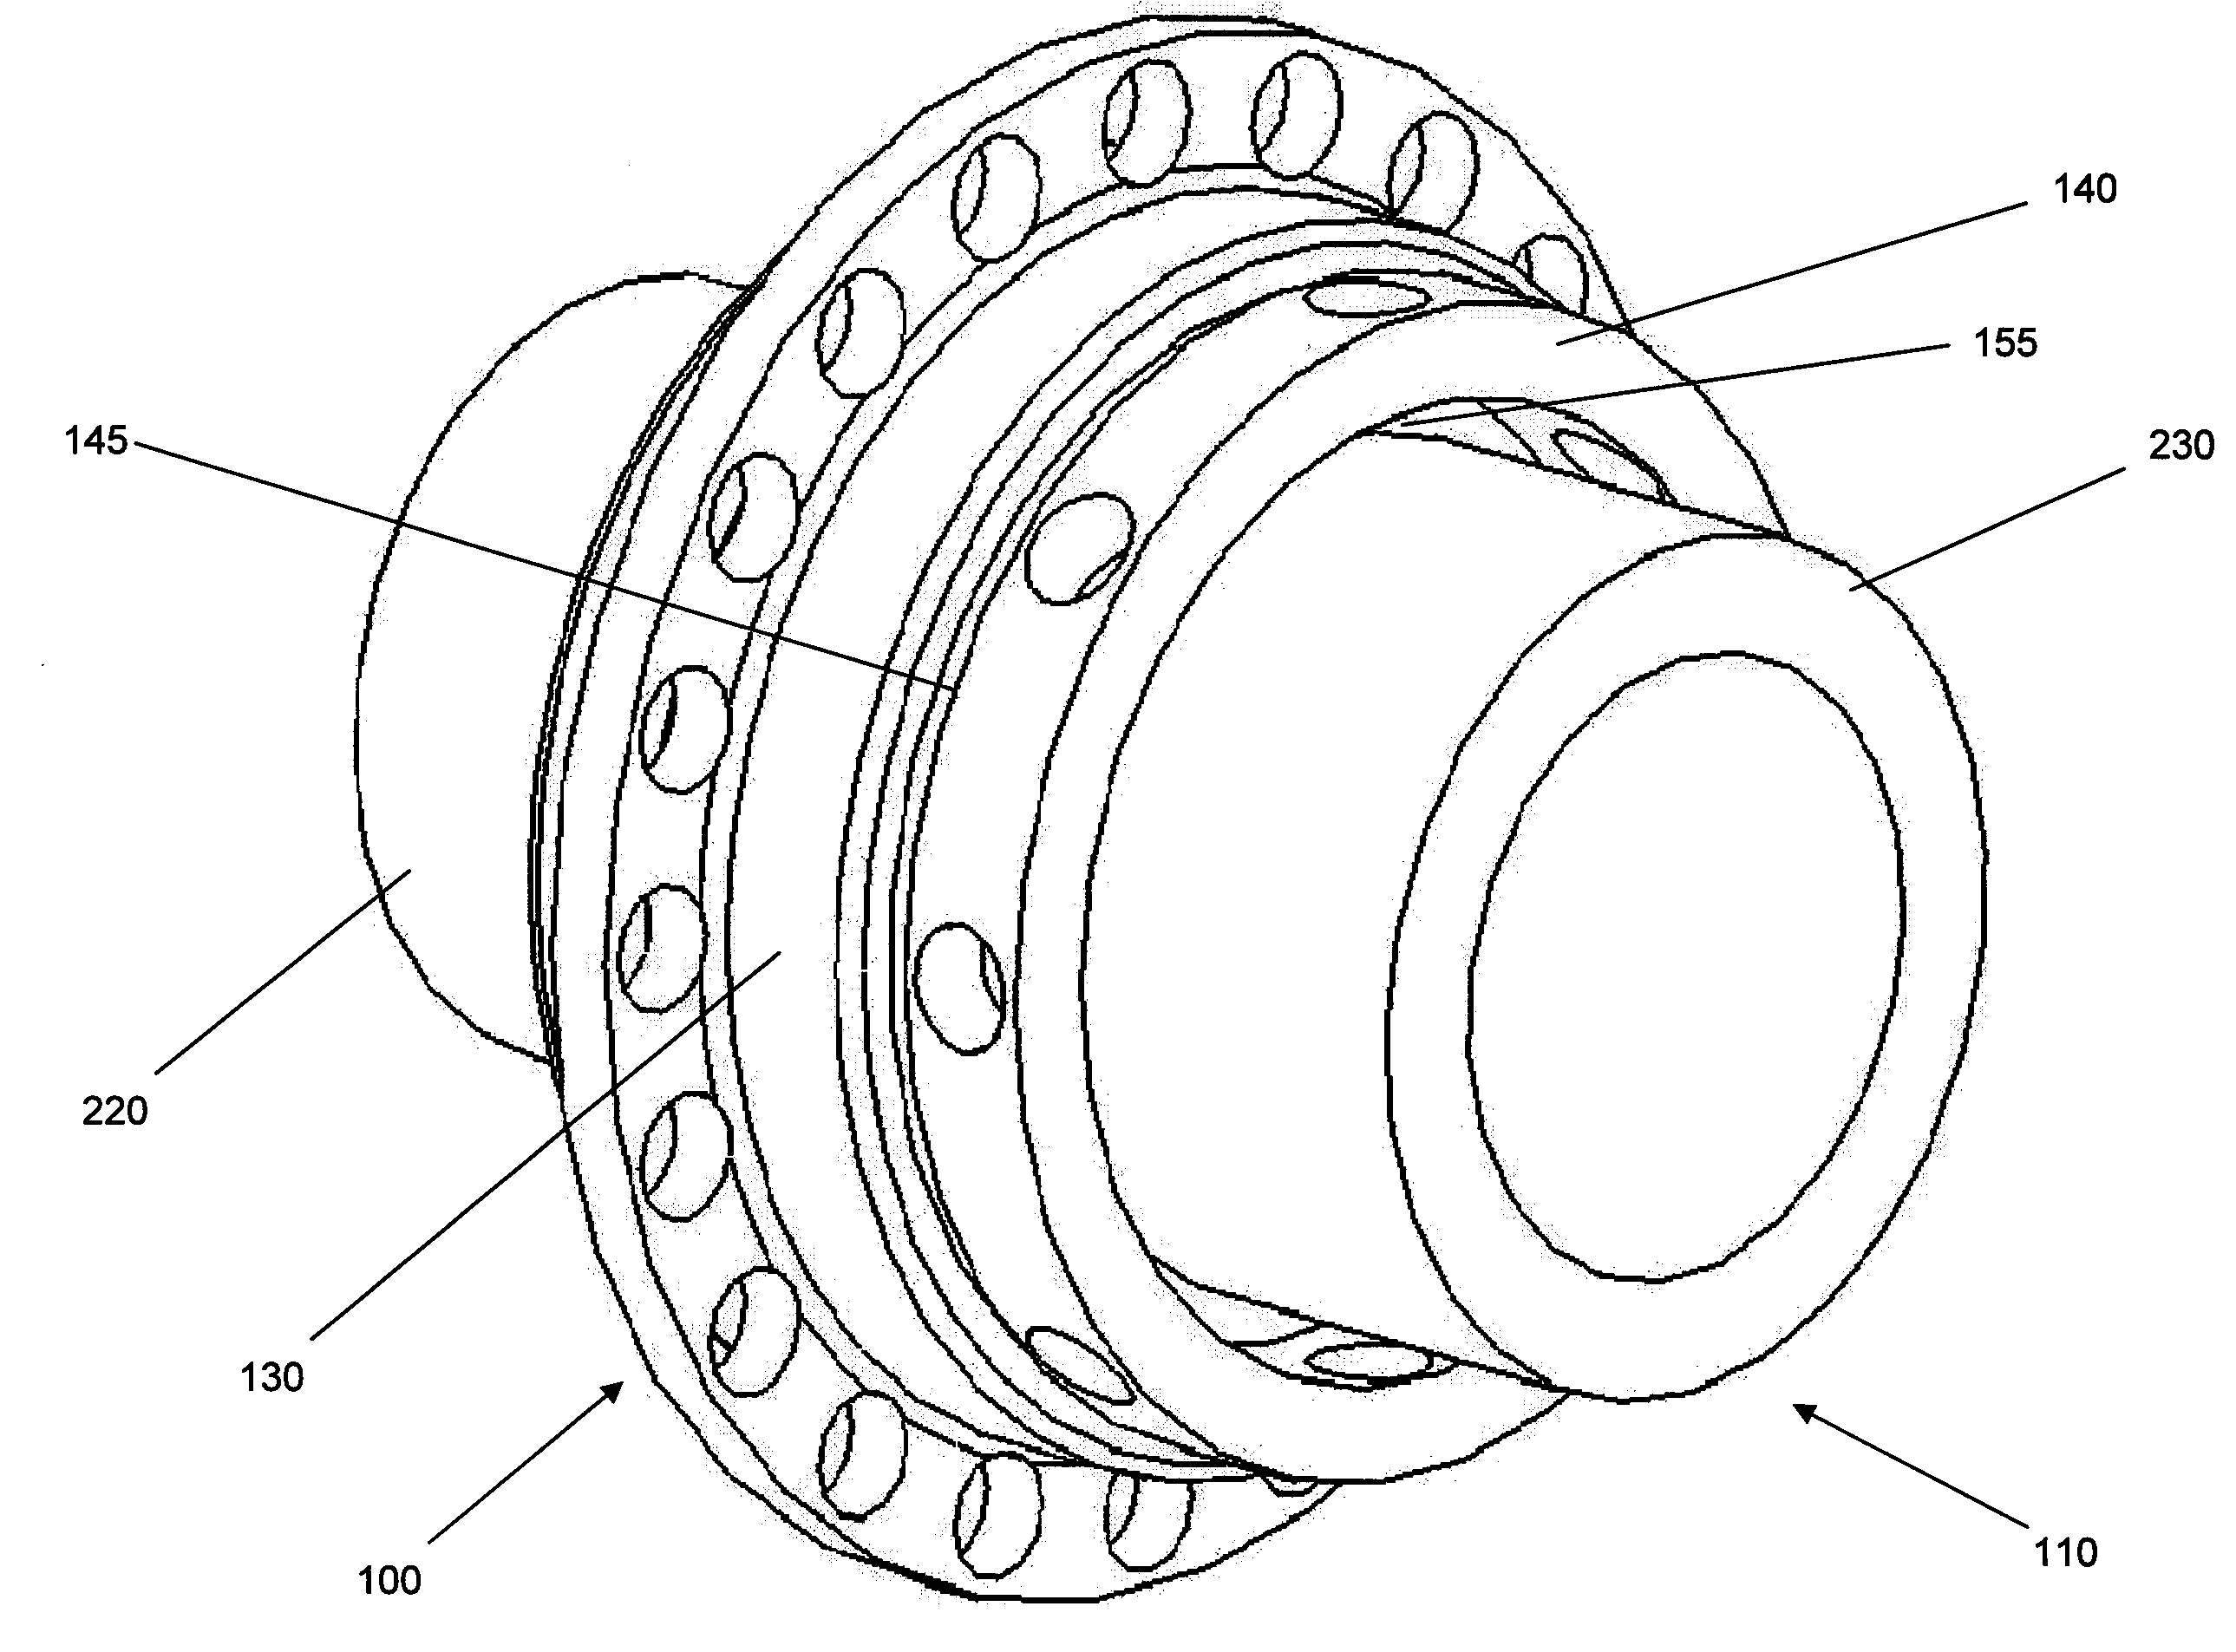 Differential pitch hammerless connection with hydraulic driving mechanism